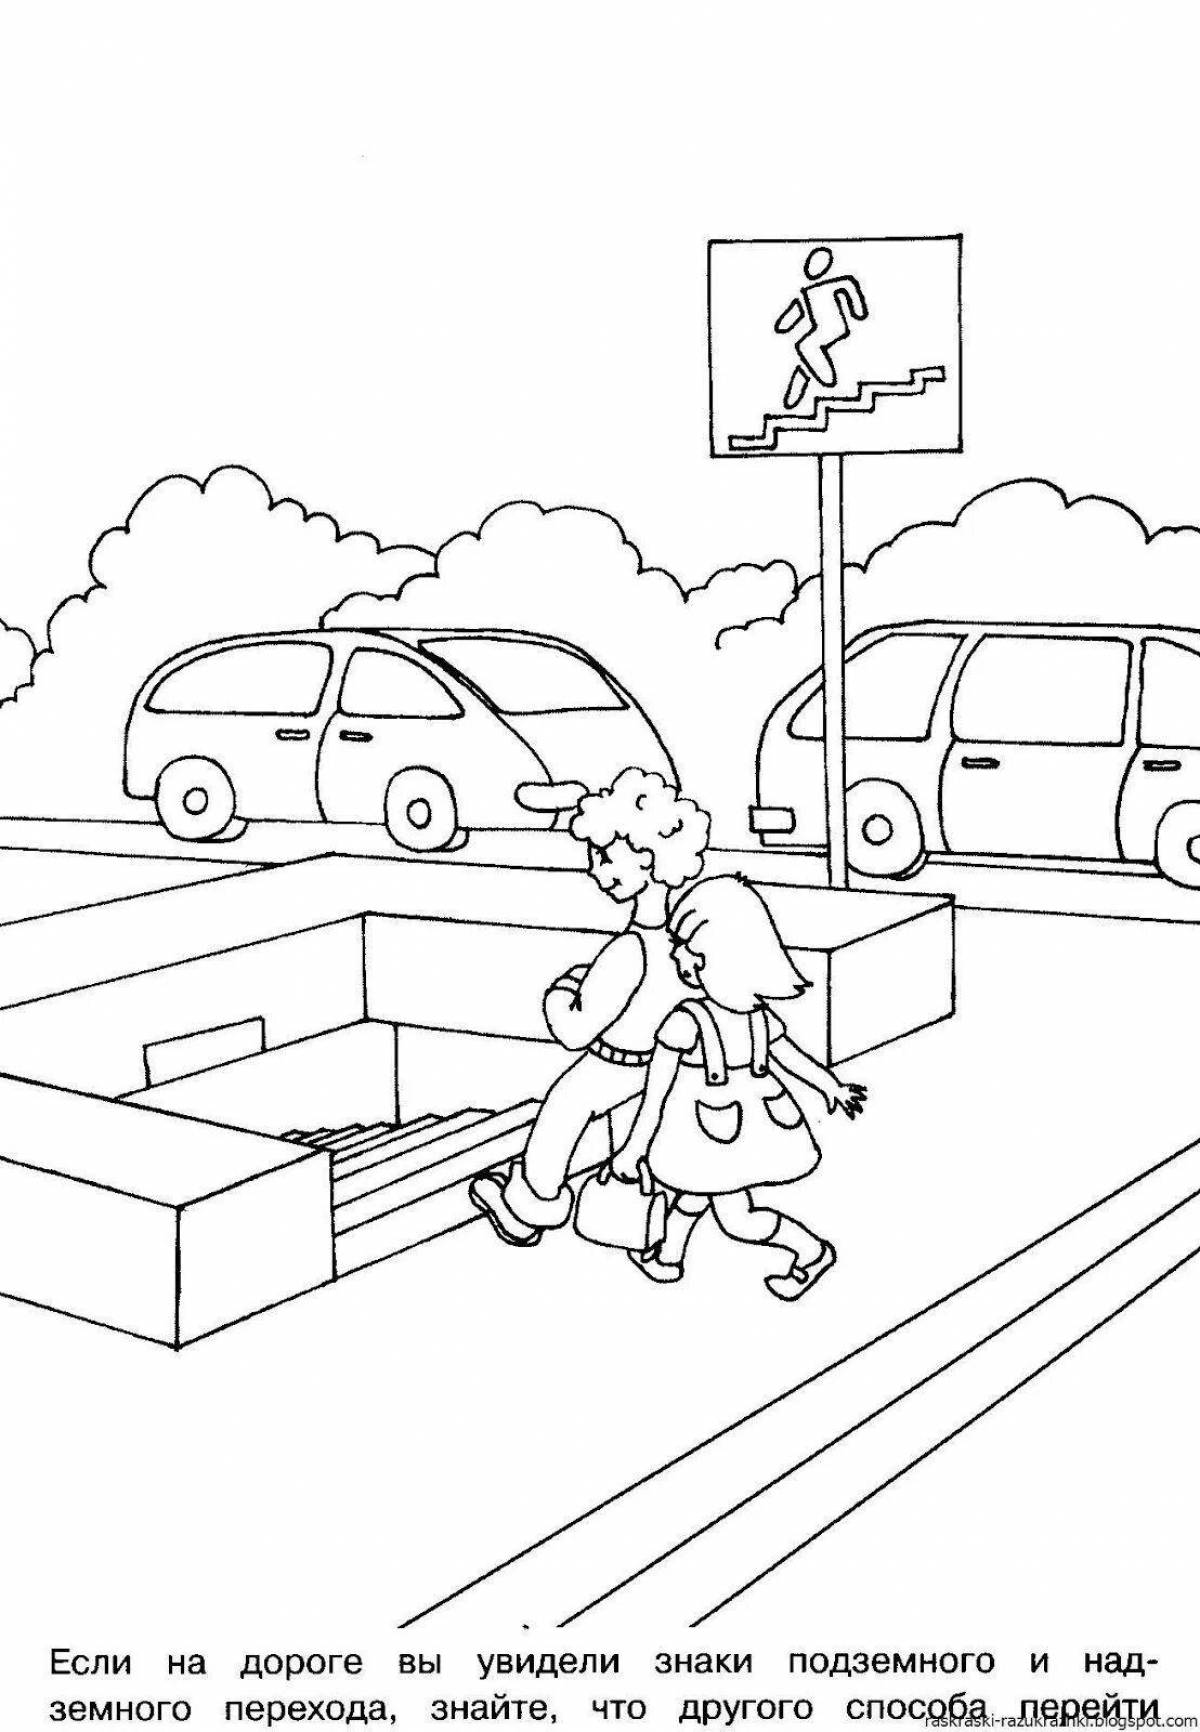 Comic road safety coloring book